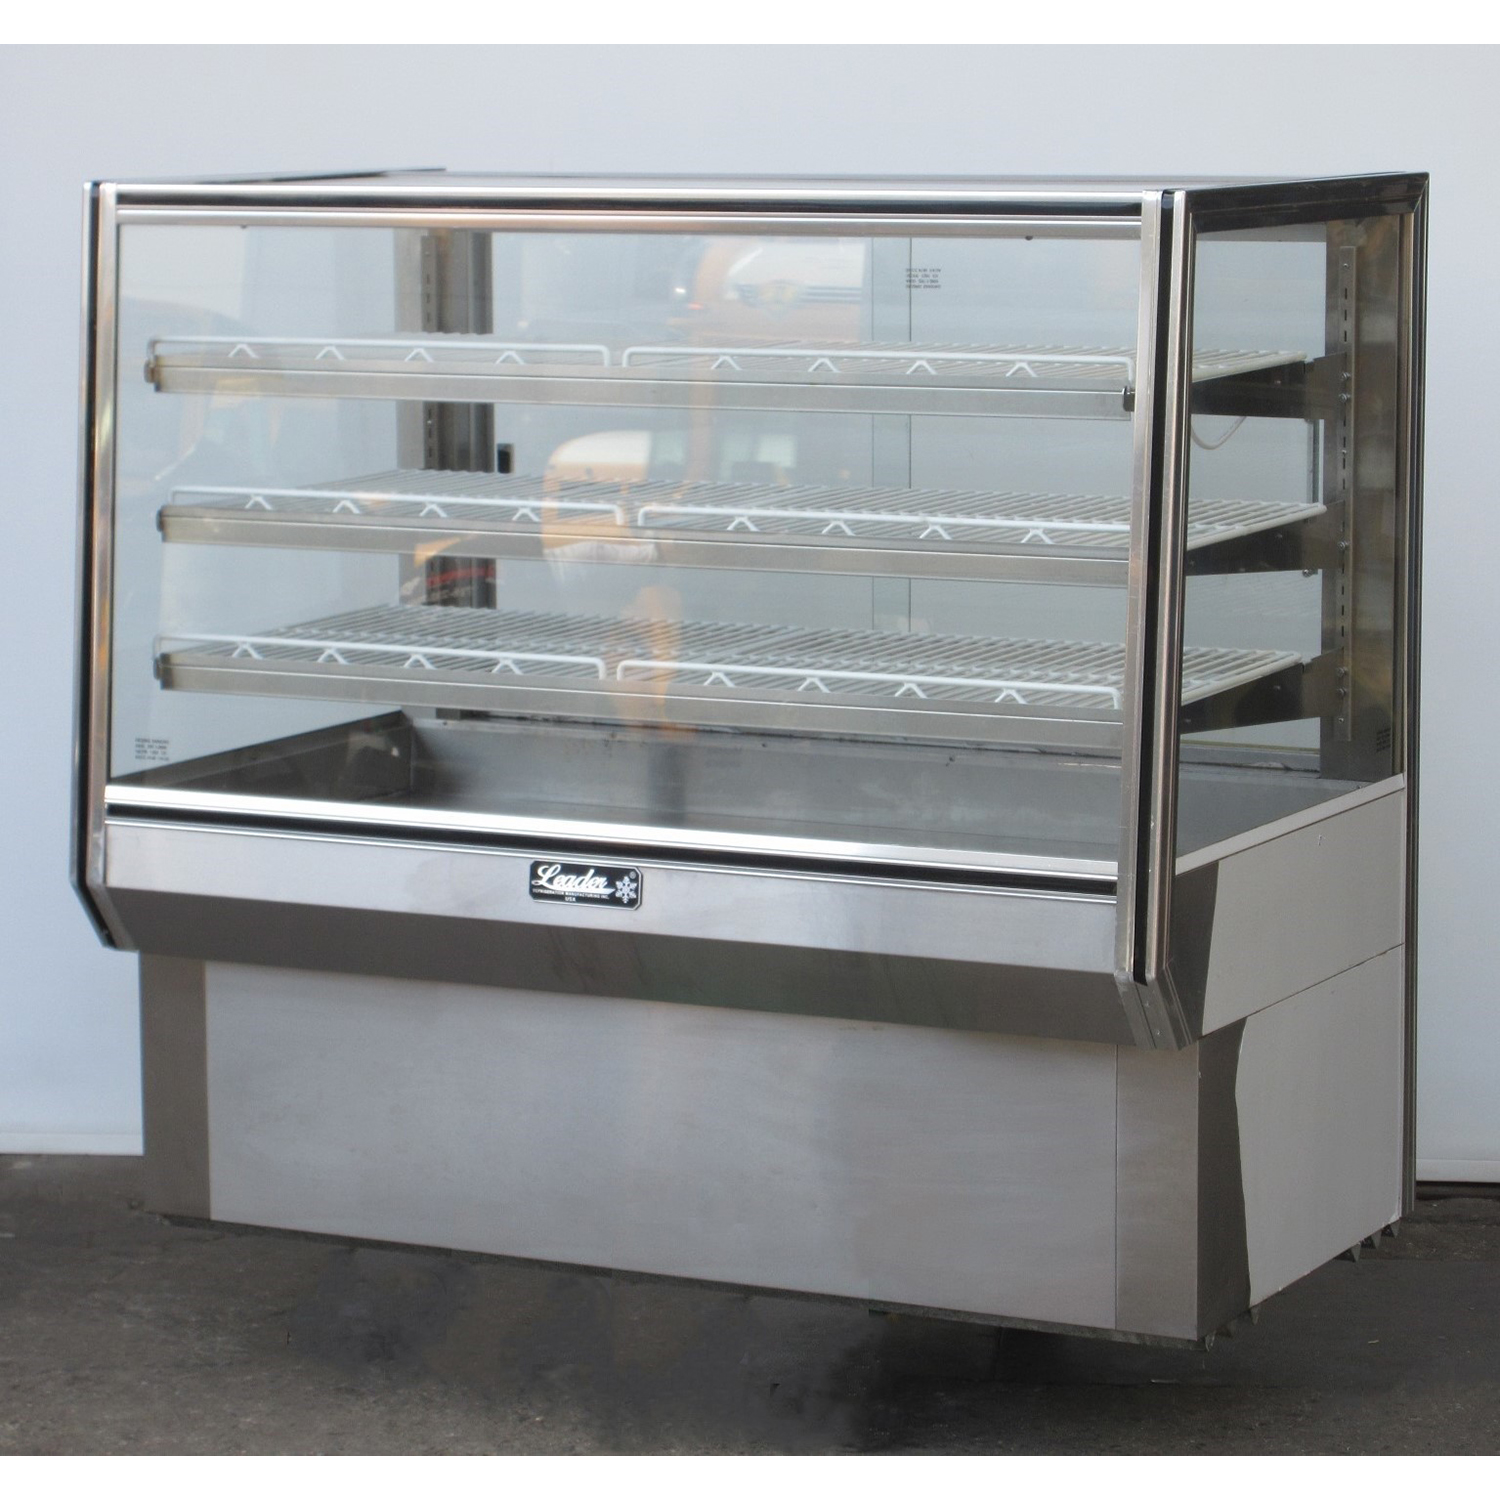 Leader HBK57D Dry Bakery Case, Used Excellent Condition